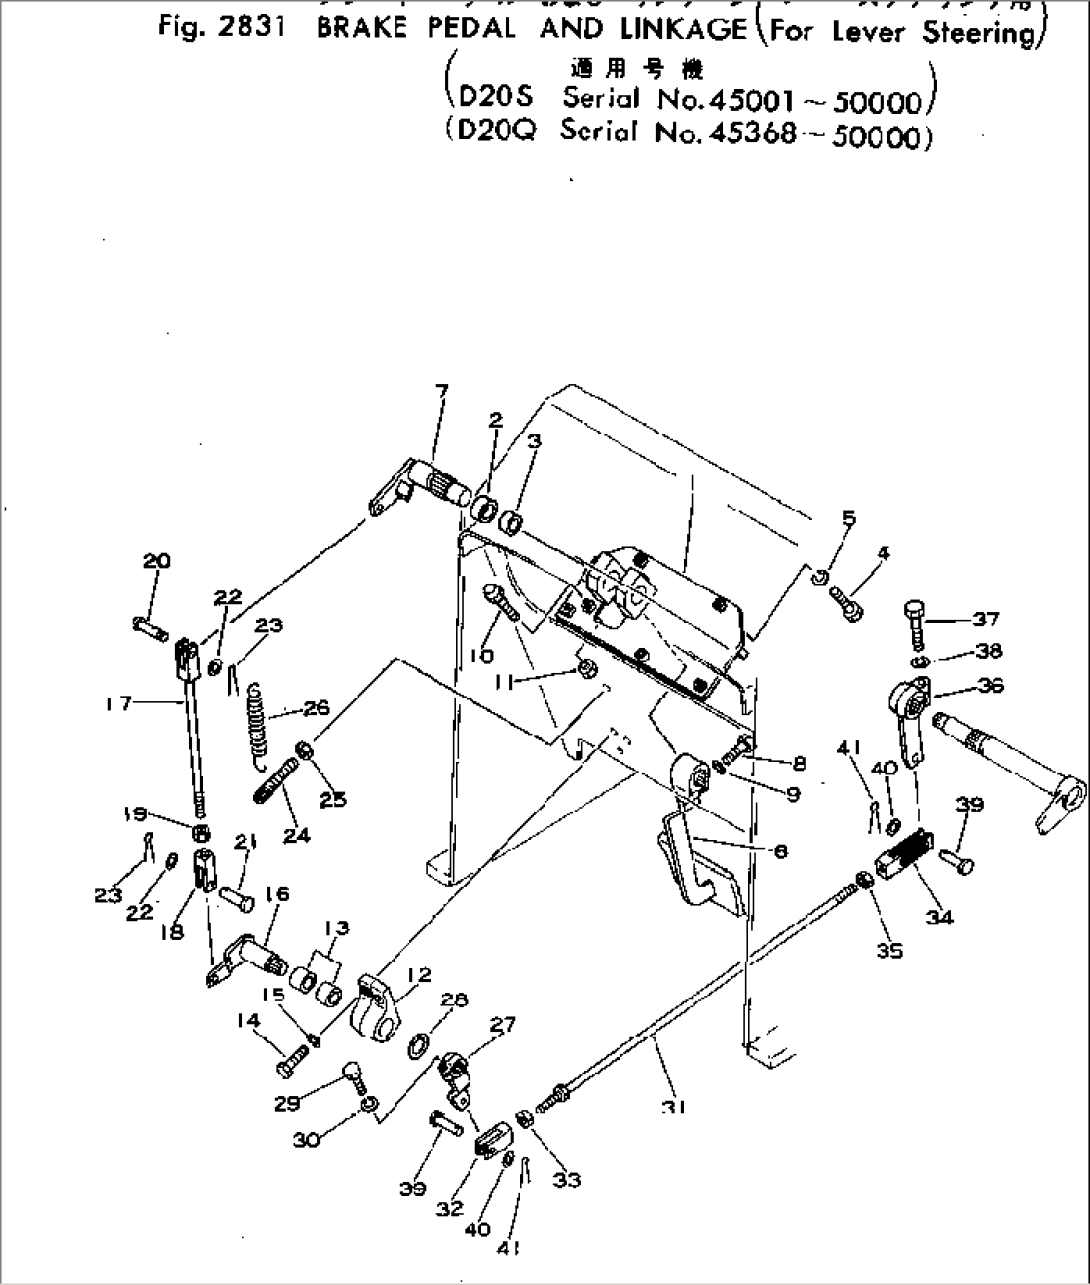 BRAKE PEDAL AND LINKAGE (FOR LEVER STEERING)(#45368-50000)